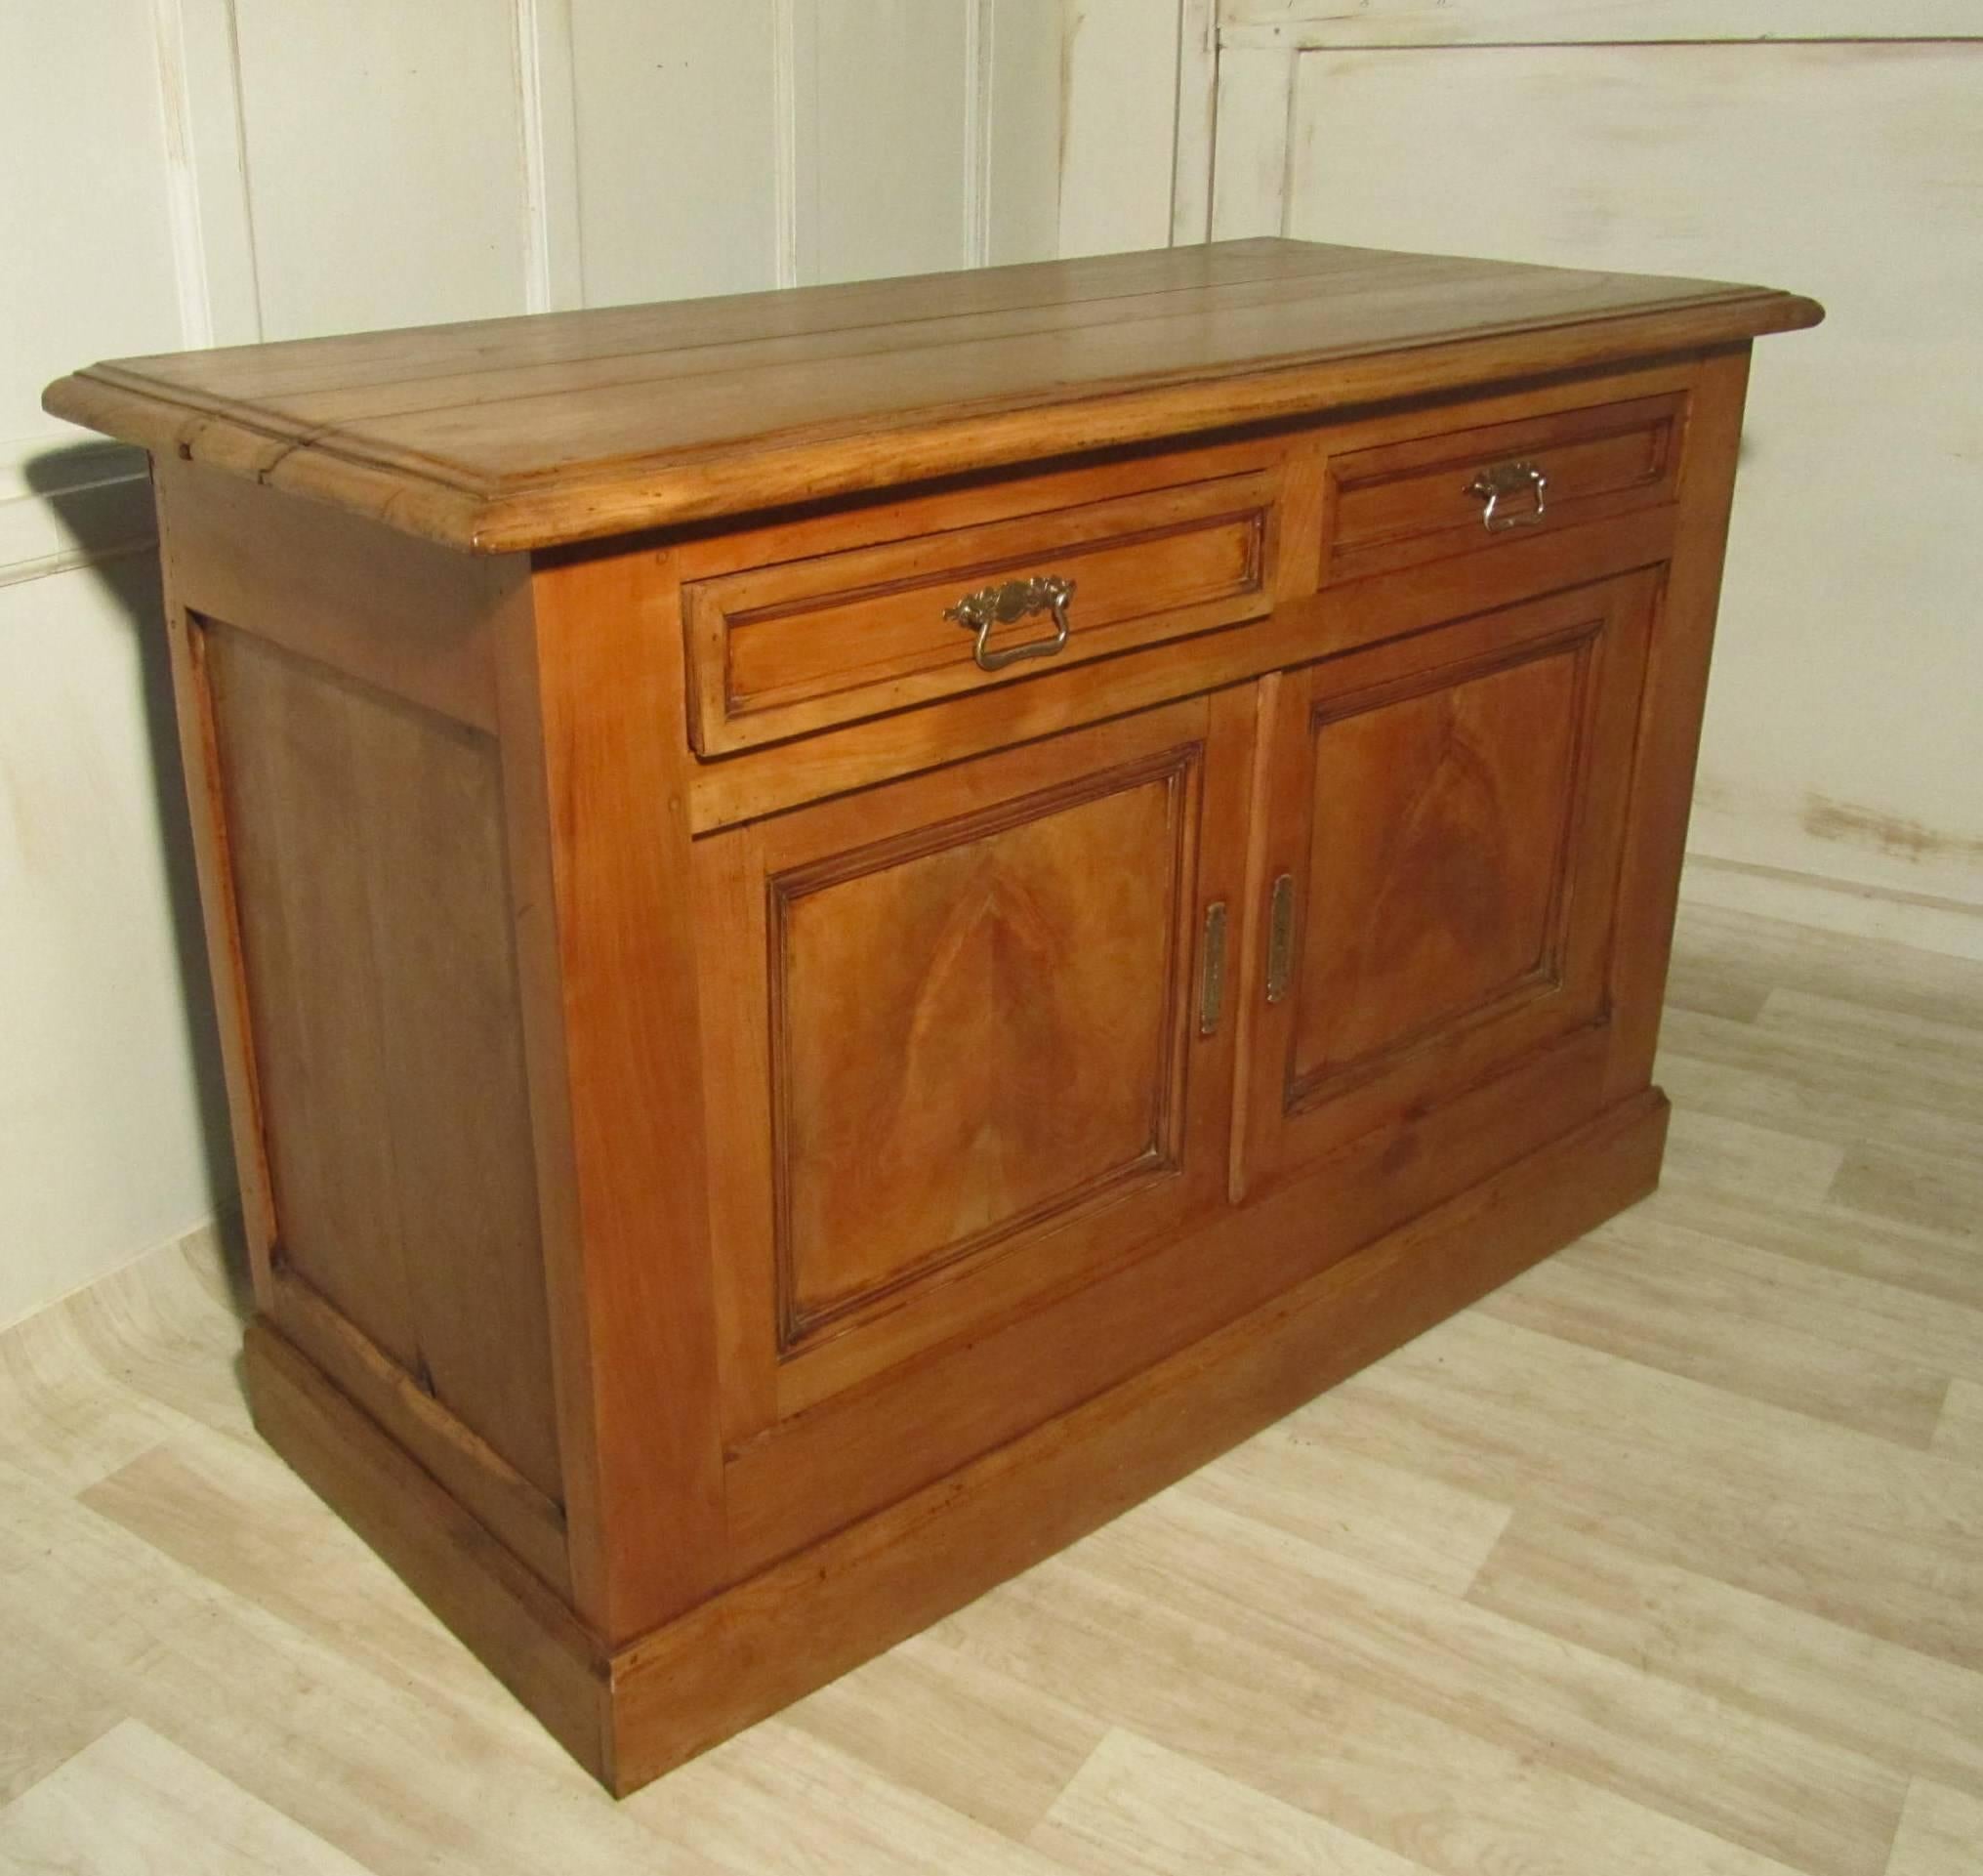 This is a splendid piece, it is well over 150 years old and has the most wonderful patina, the dresser is made in cheerywood 
The dresser is rustic heavy piece, the two doors enclose one large shelved cupboard and there are two drawers above.
The